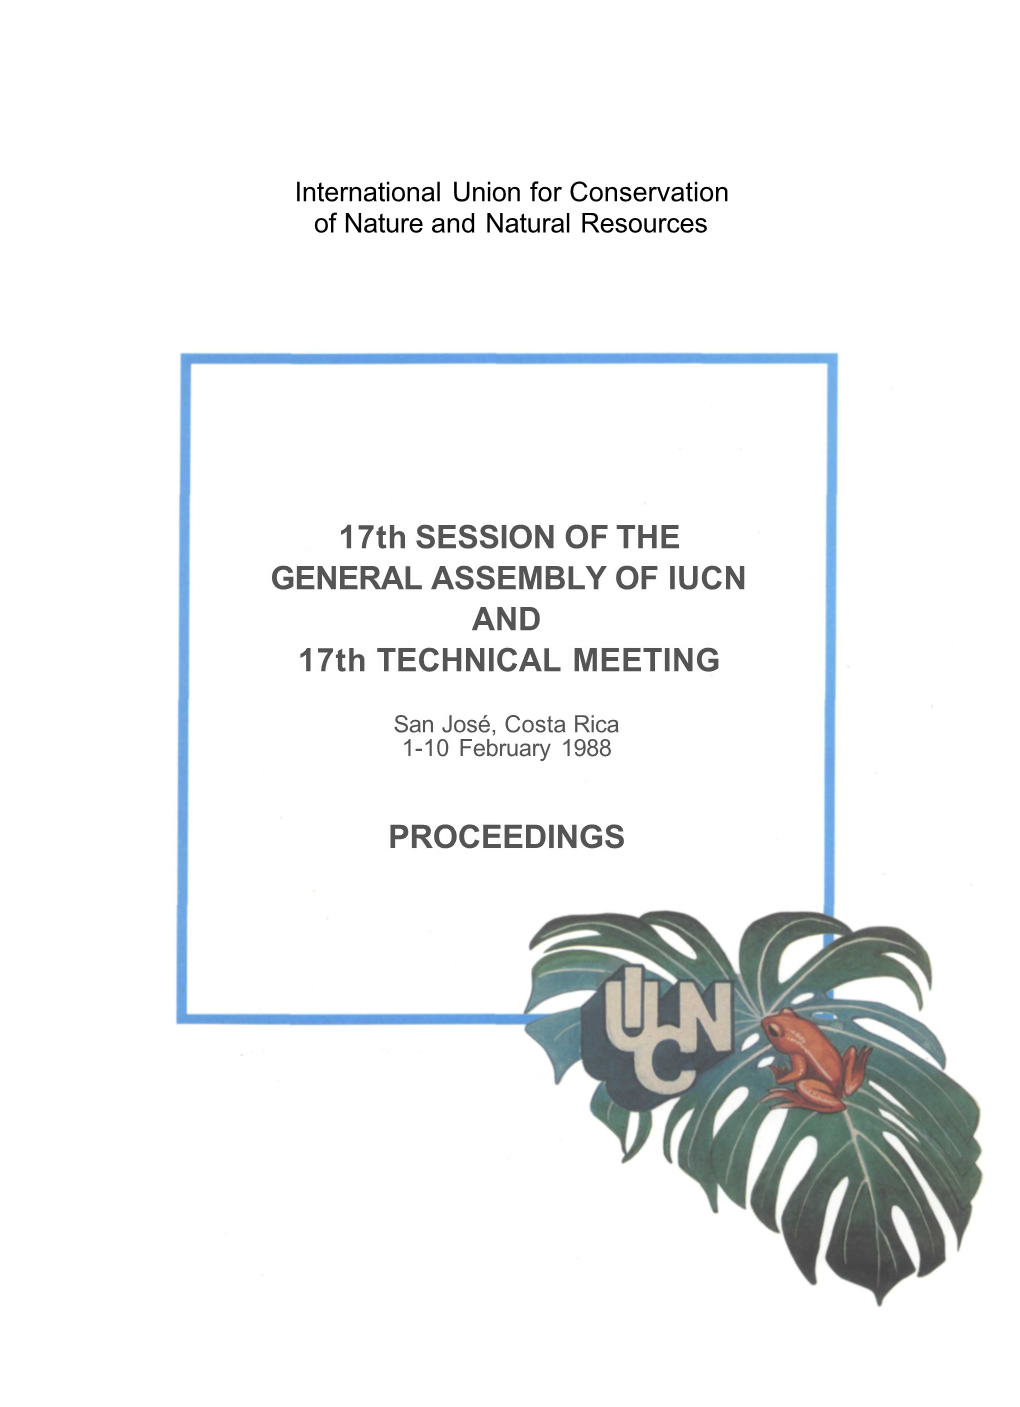 17Th SESSION of the GENERAL ASSEMBLY of IUCN and 17Th TECHNICAL MEETING